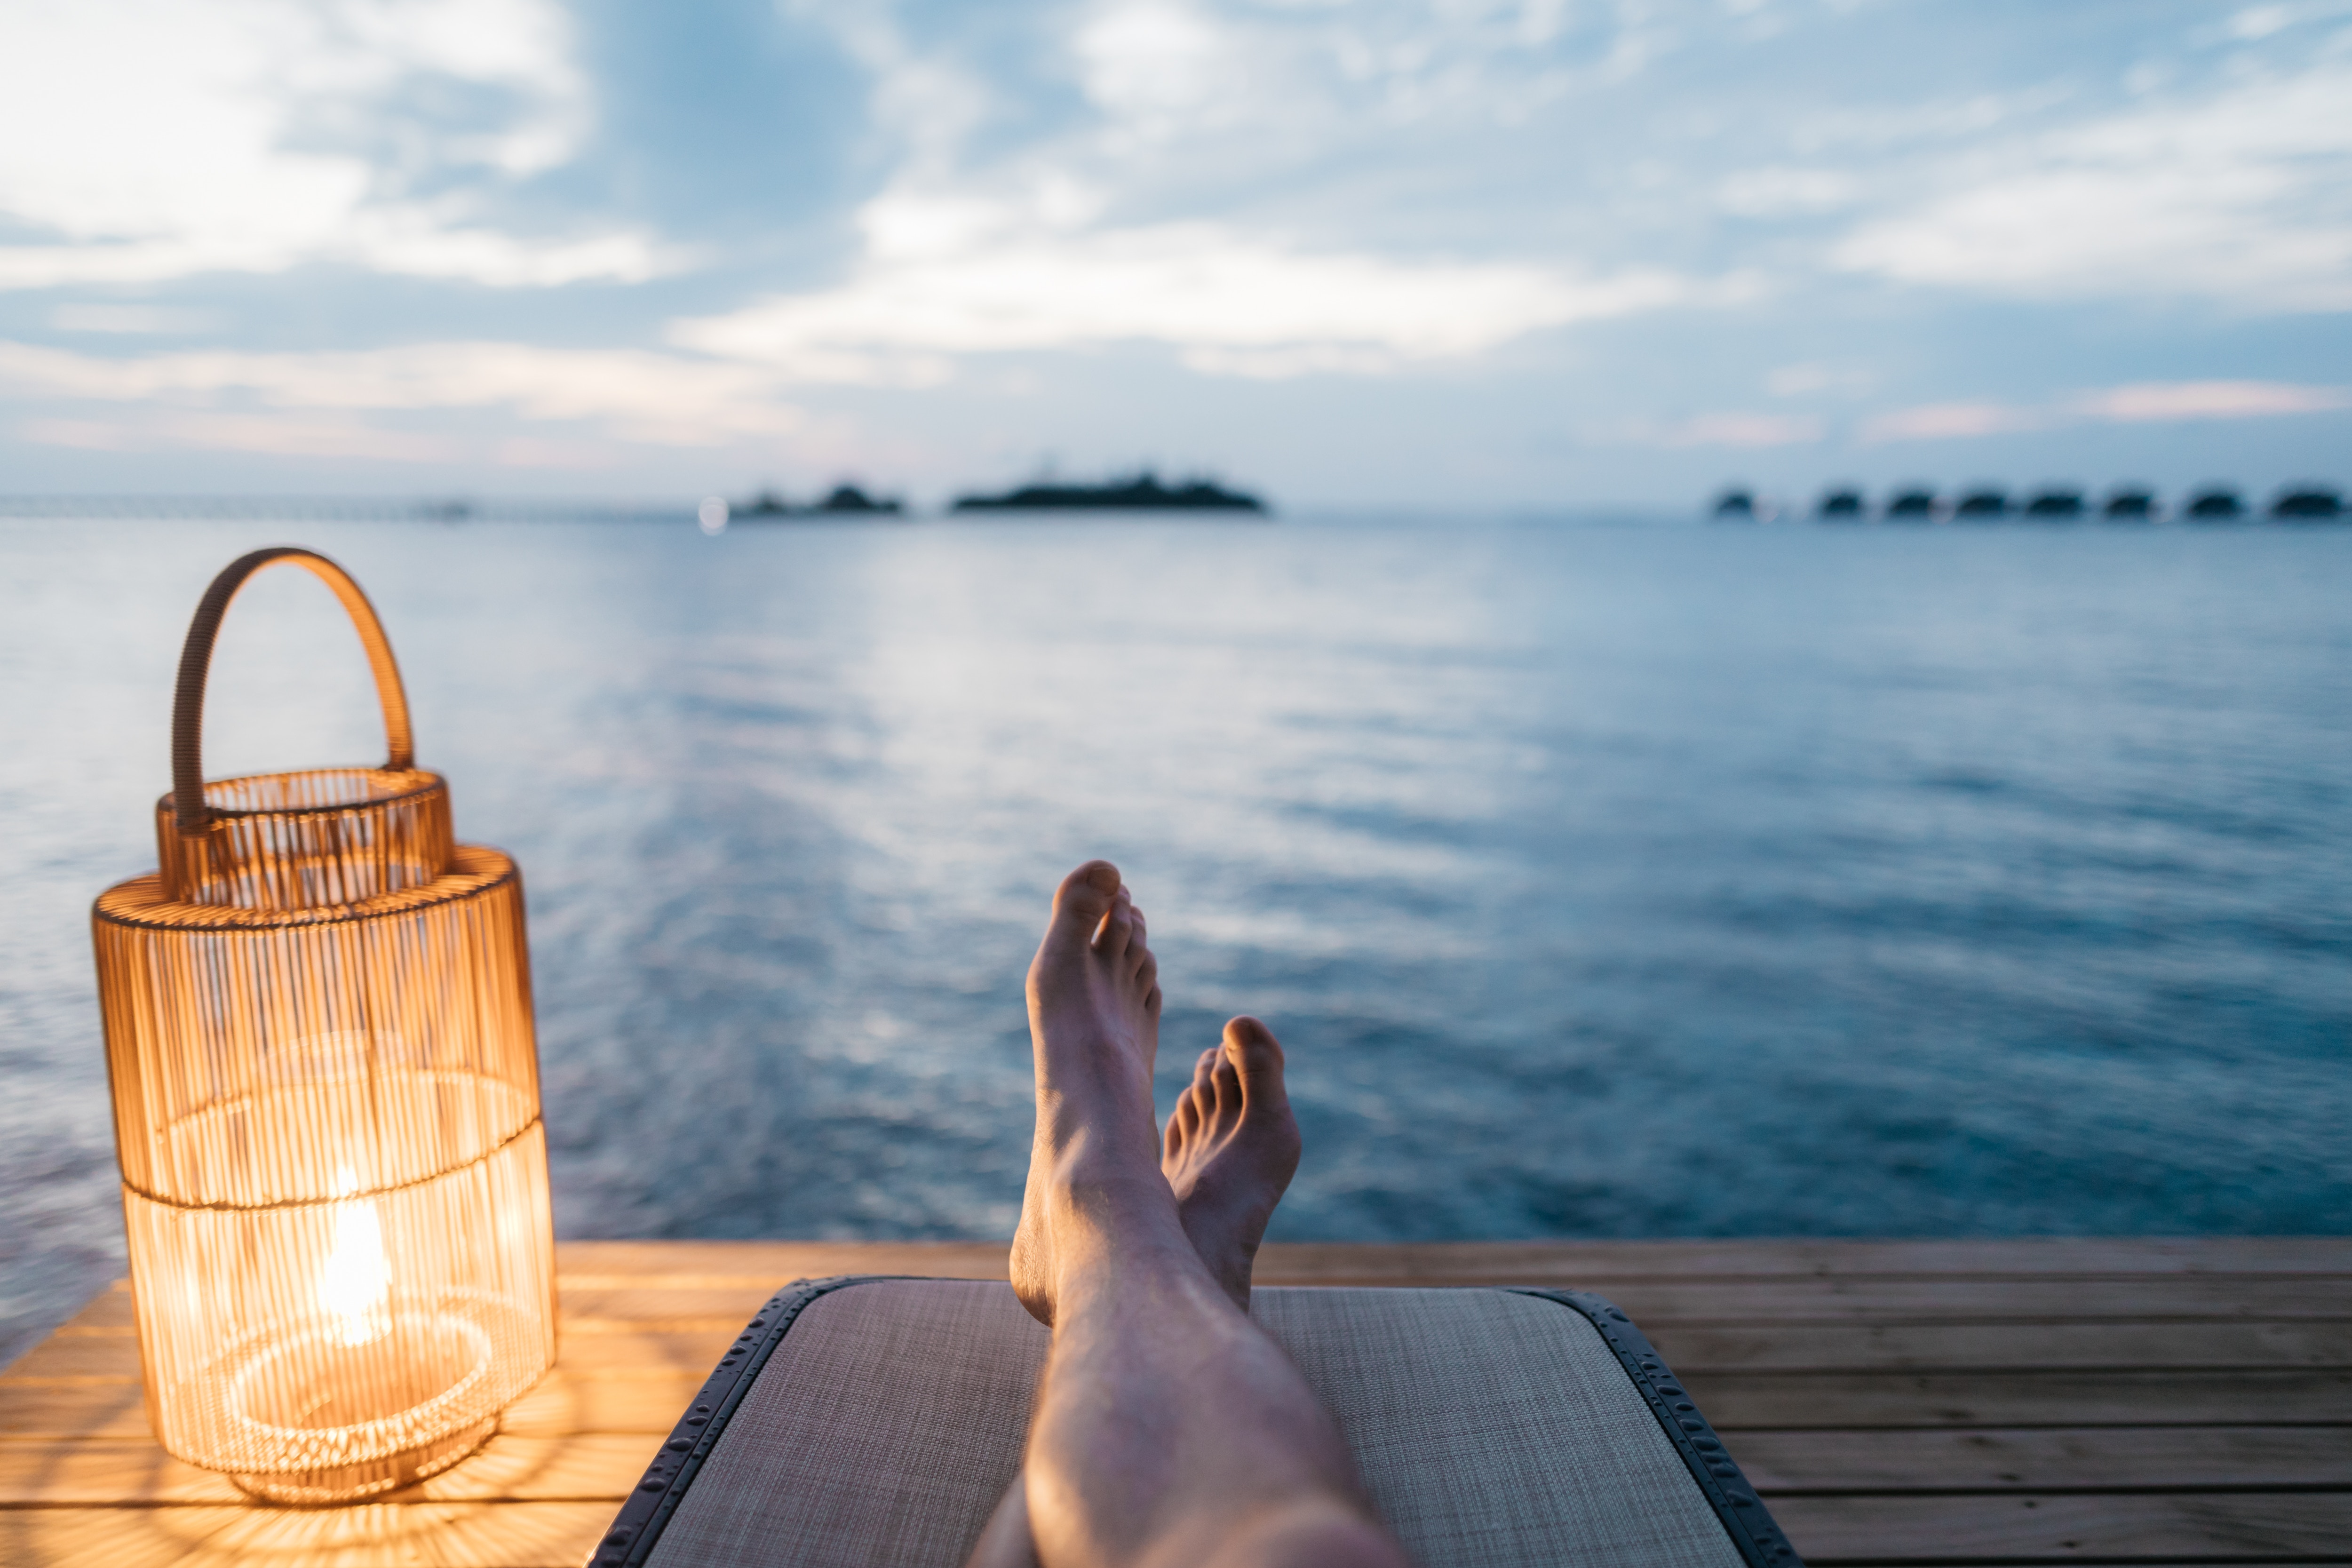 Person relaxing by the sea with their feet up and a candle lit